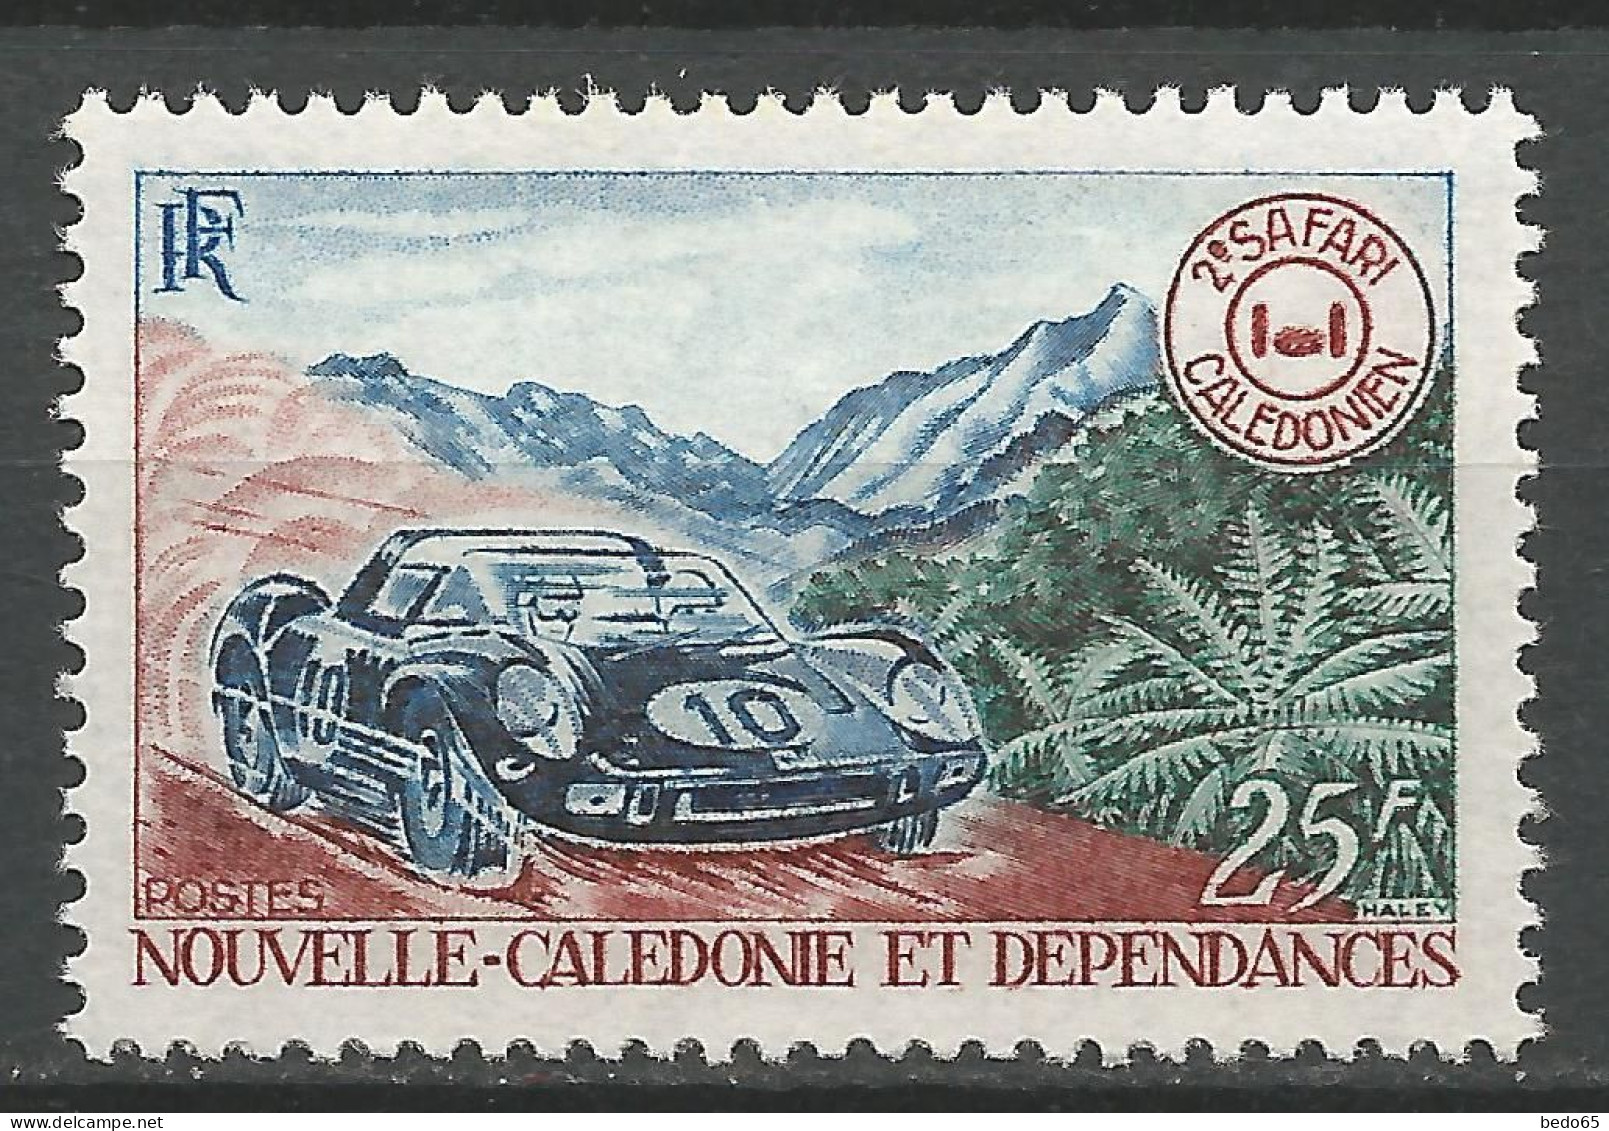 NOUVELLE-CALEDONIE N° 355 NEUF** LUXE SANS CHARNIERE / Hingeless  / MNH - Nuovi